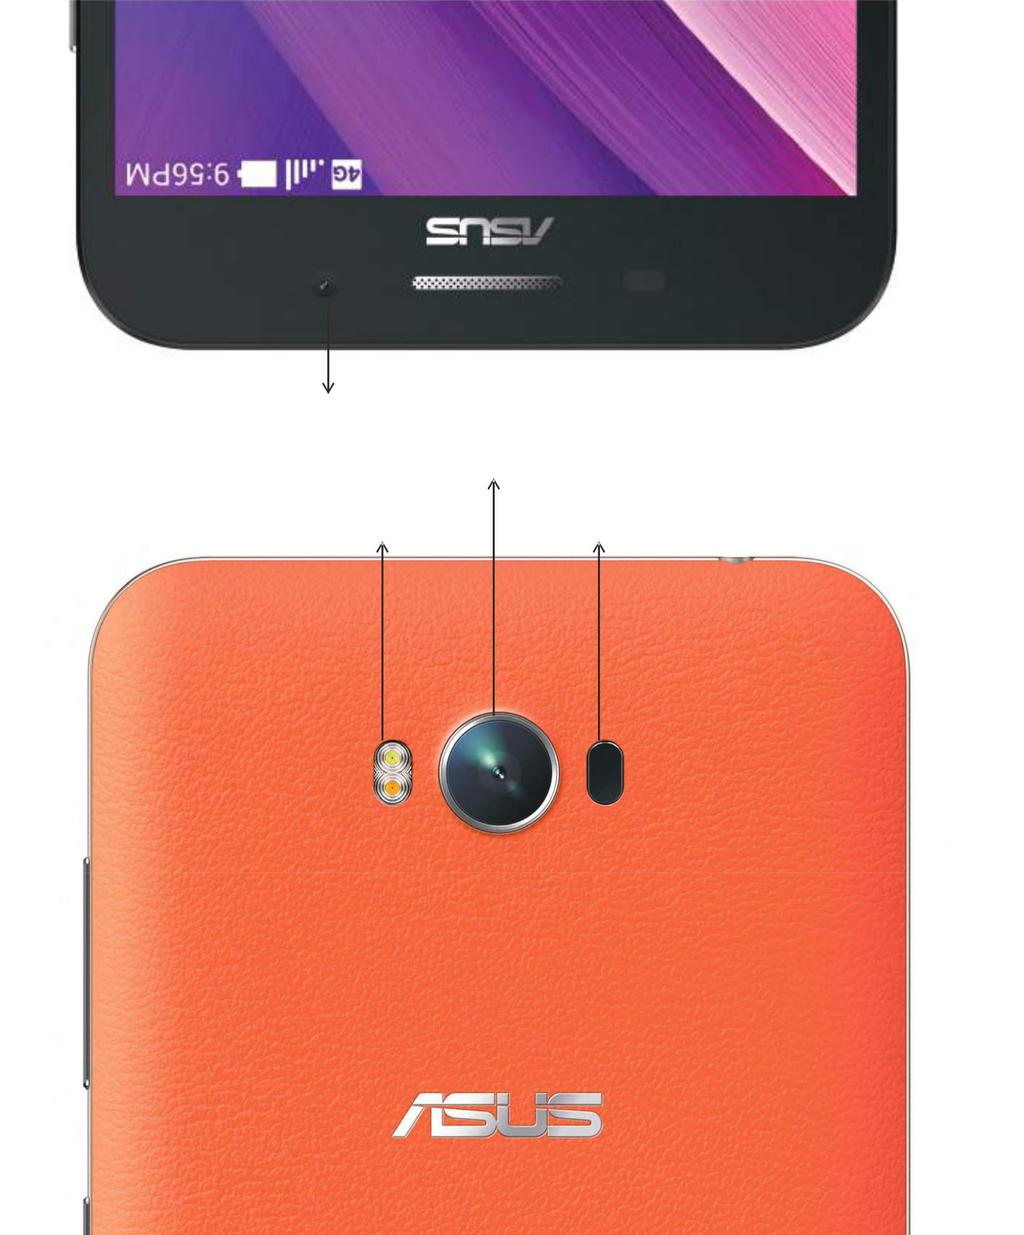 PixelMaster 2.0 The ASUS exclusive camera technology ZenFone Max is packed with the latest PixelMaster 2.